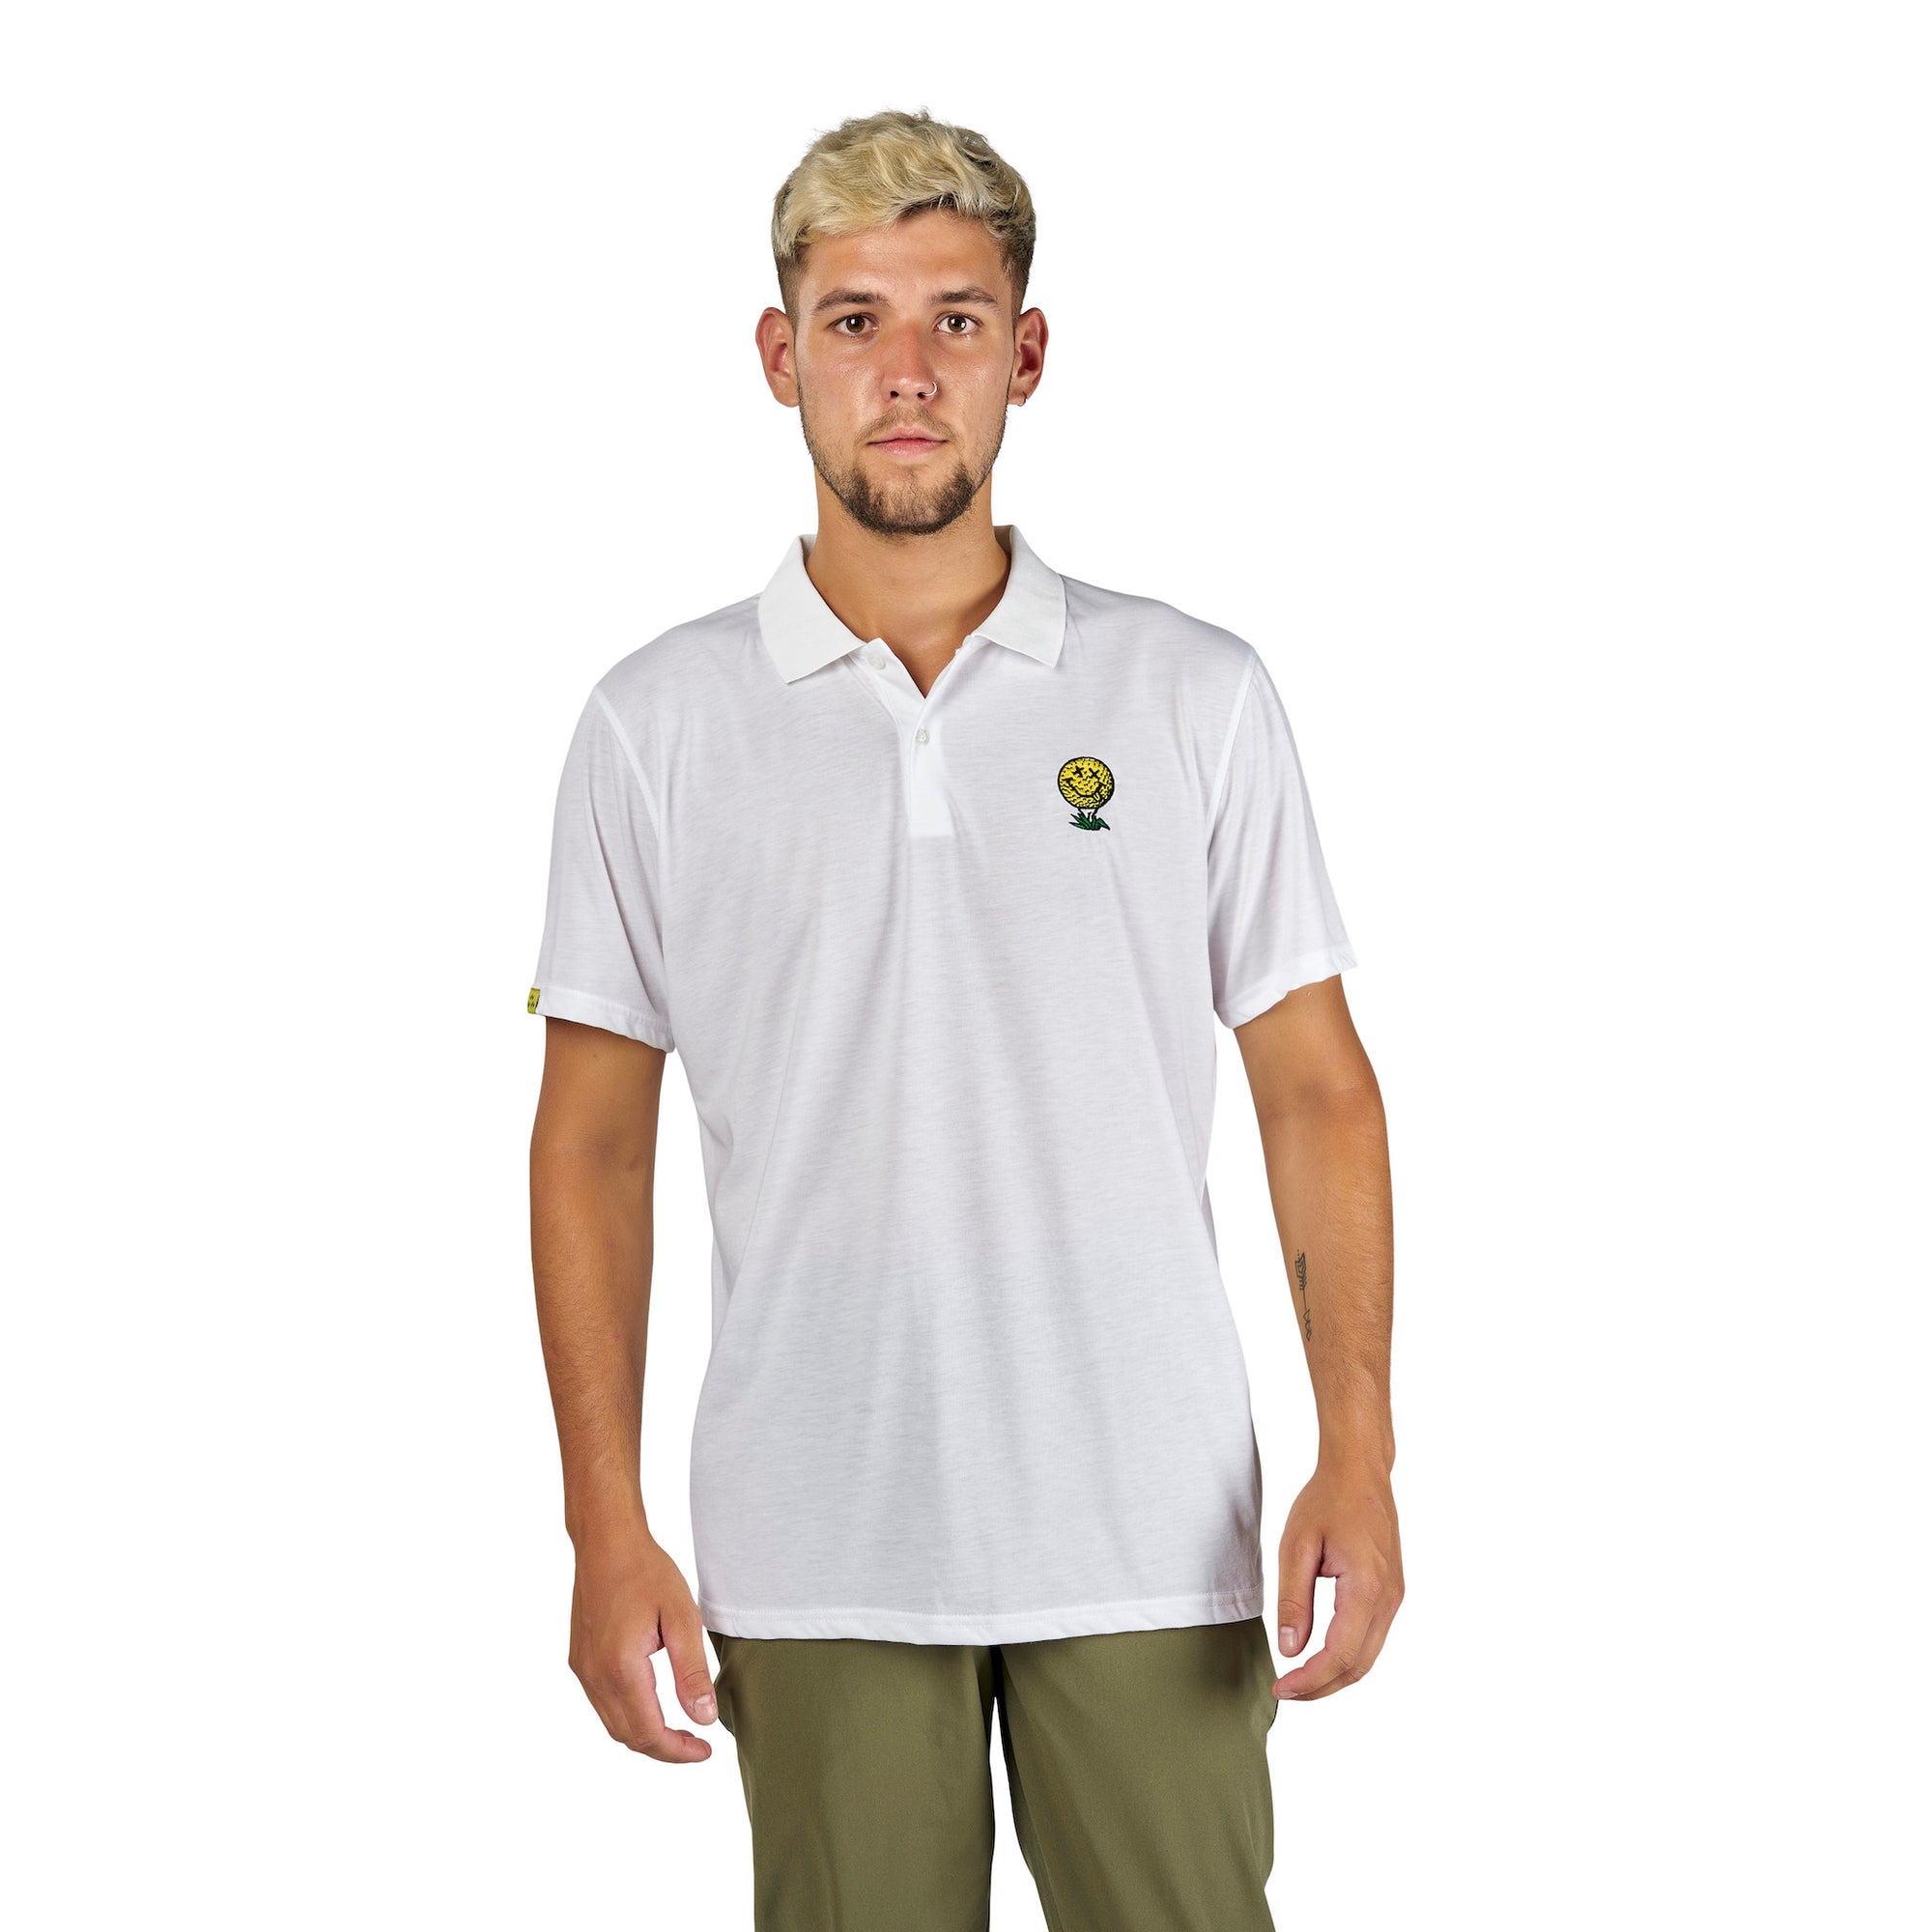 One of the most loved Birds of Condor pop culture mashups is back in ...white.  The best white golf polo shirt you can get your hands on in 2022 is super cool to wear on the hottest days and features the neverfind golf ball character.  Made from tech drirelease fabric that won't quit.